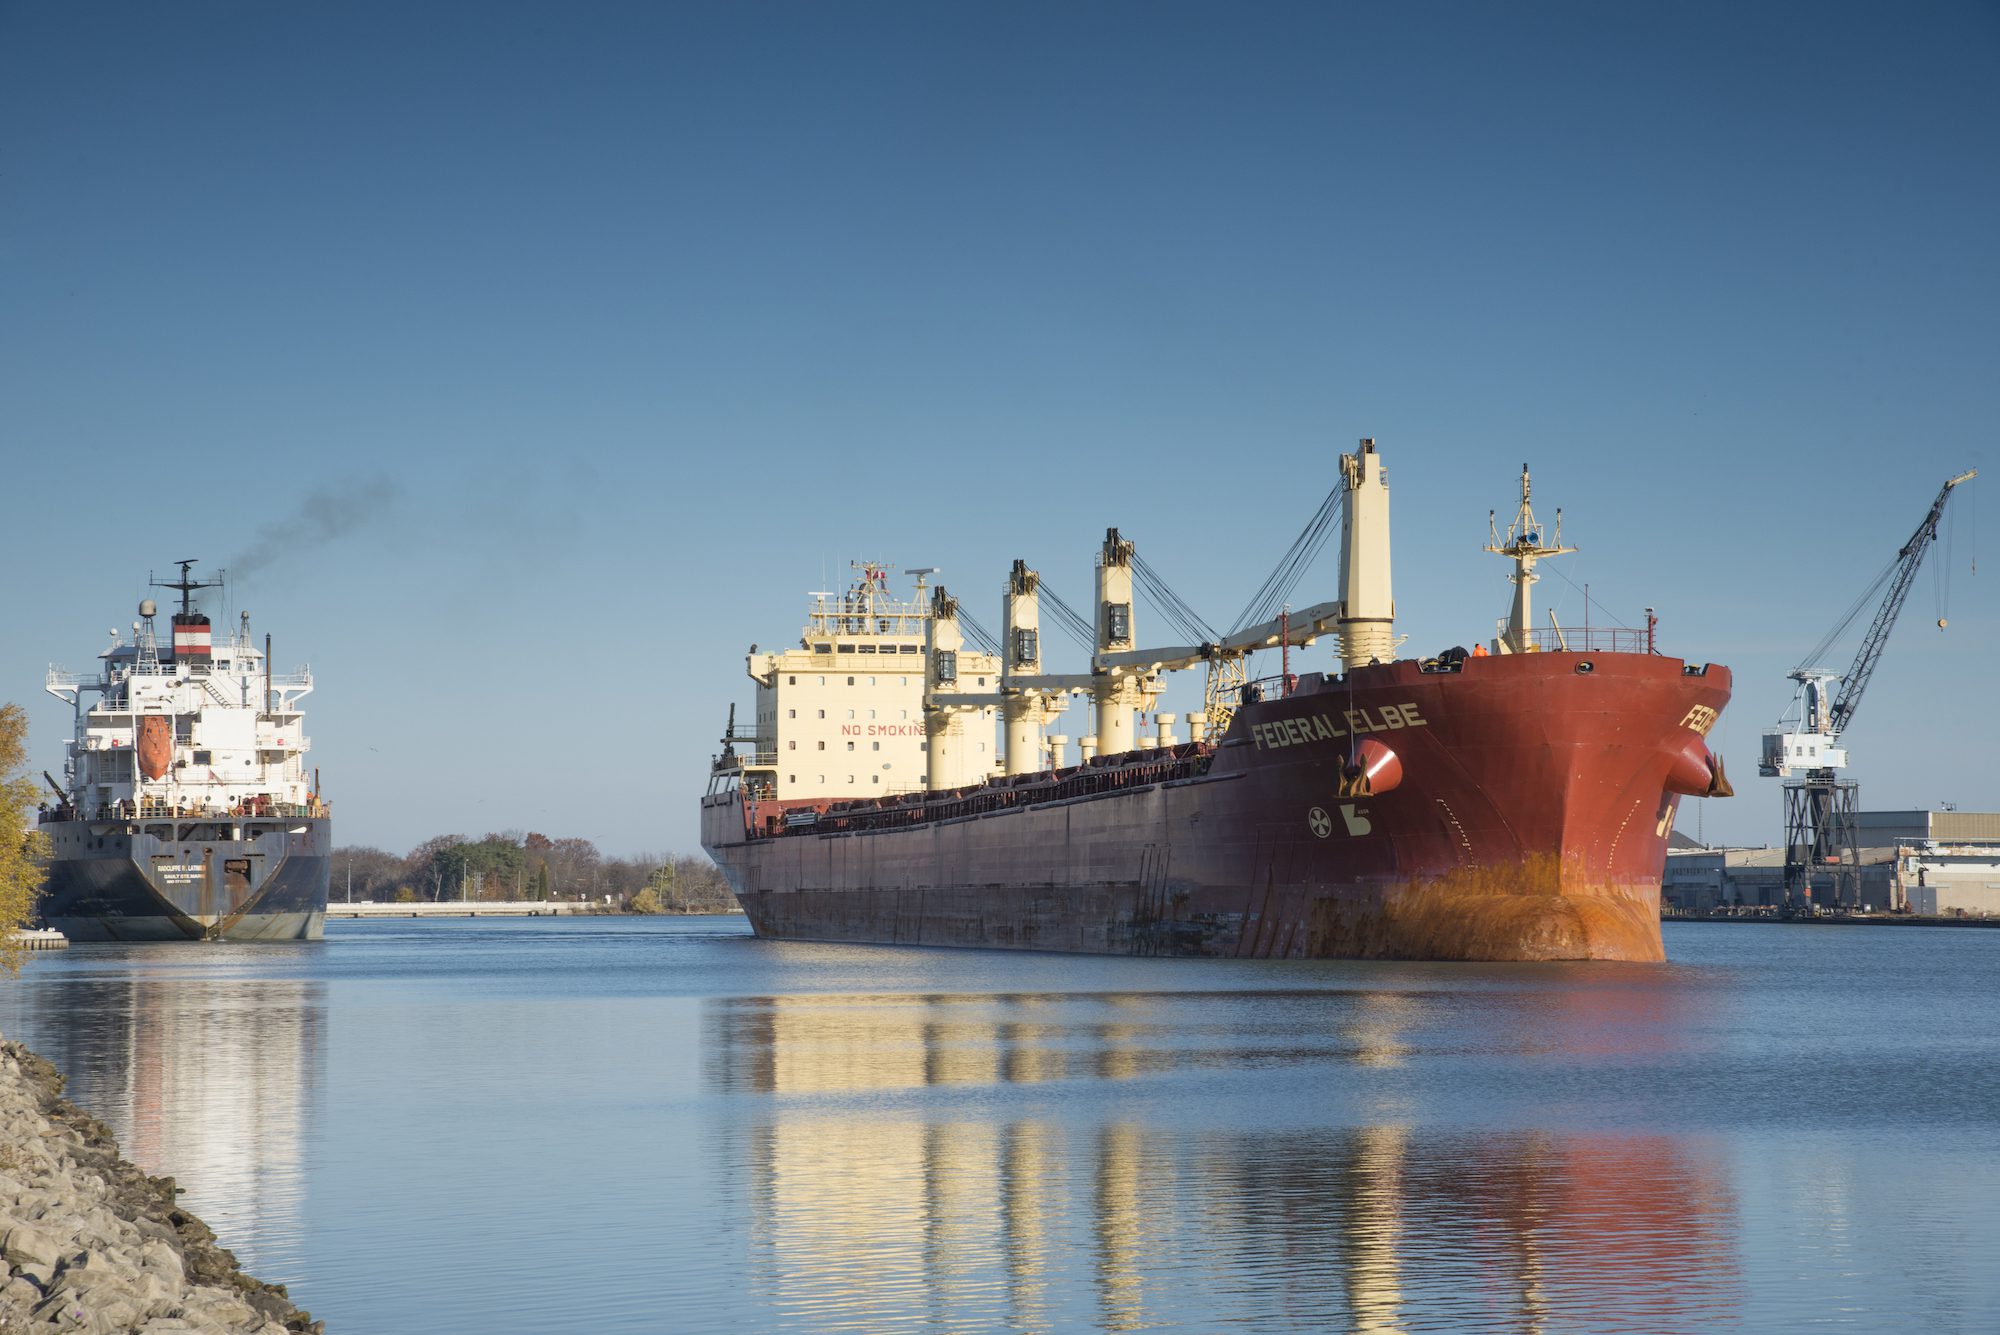 File photo shows a cargo ship transiting on the St. Lawrence Seaway near the Welland Canal. Photo: Jon Nicholls Photography / Shutterstock.com